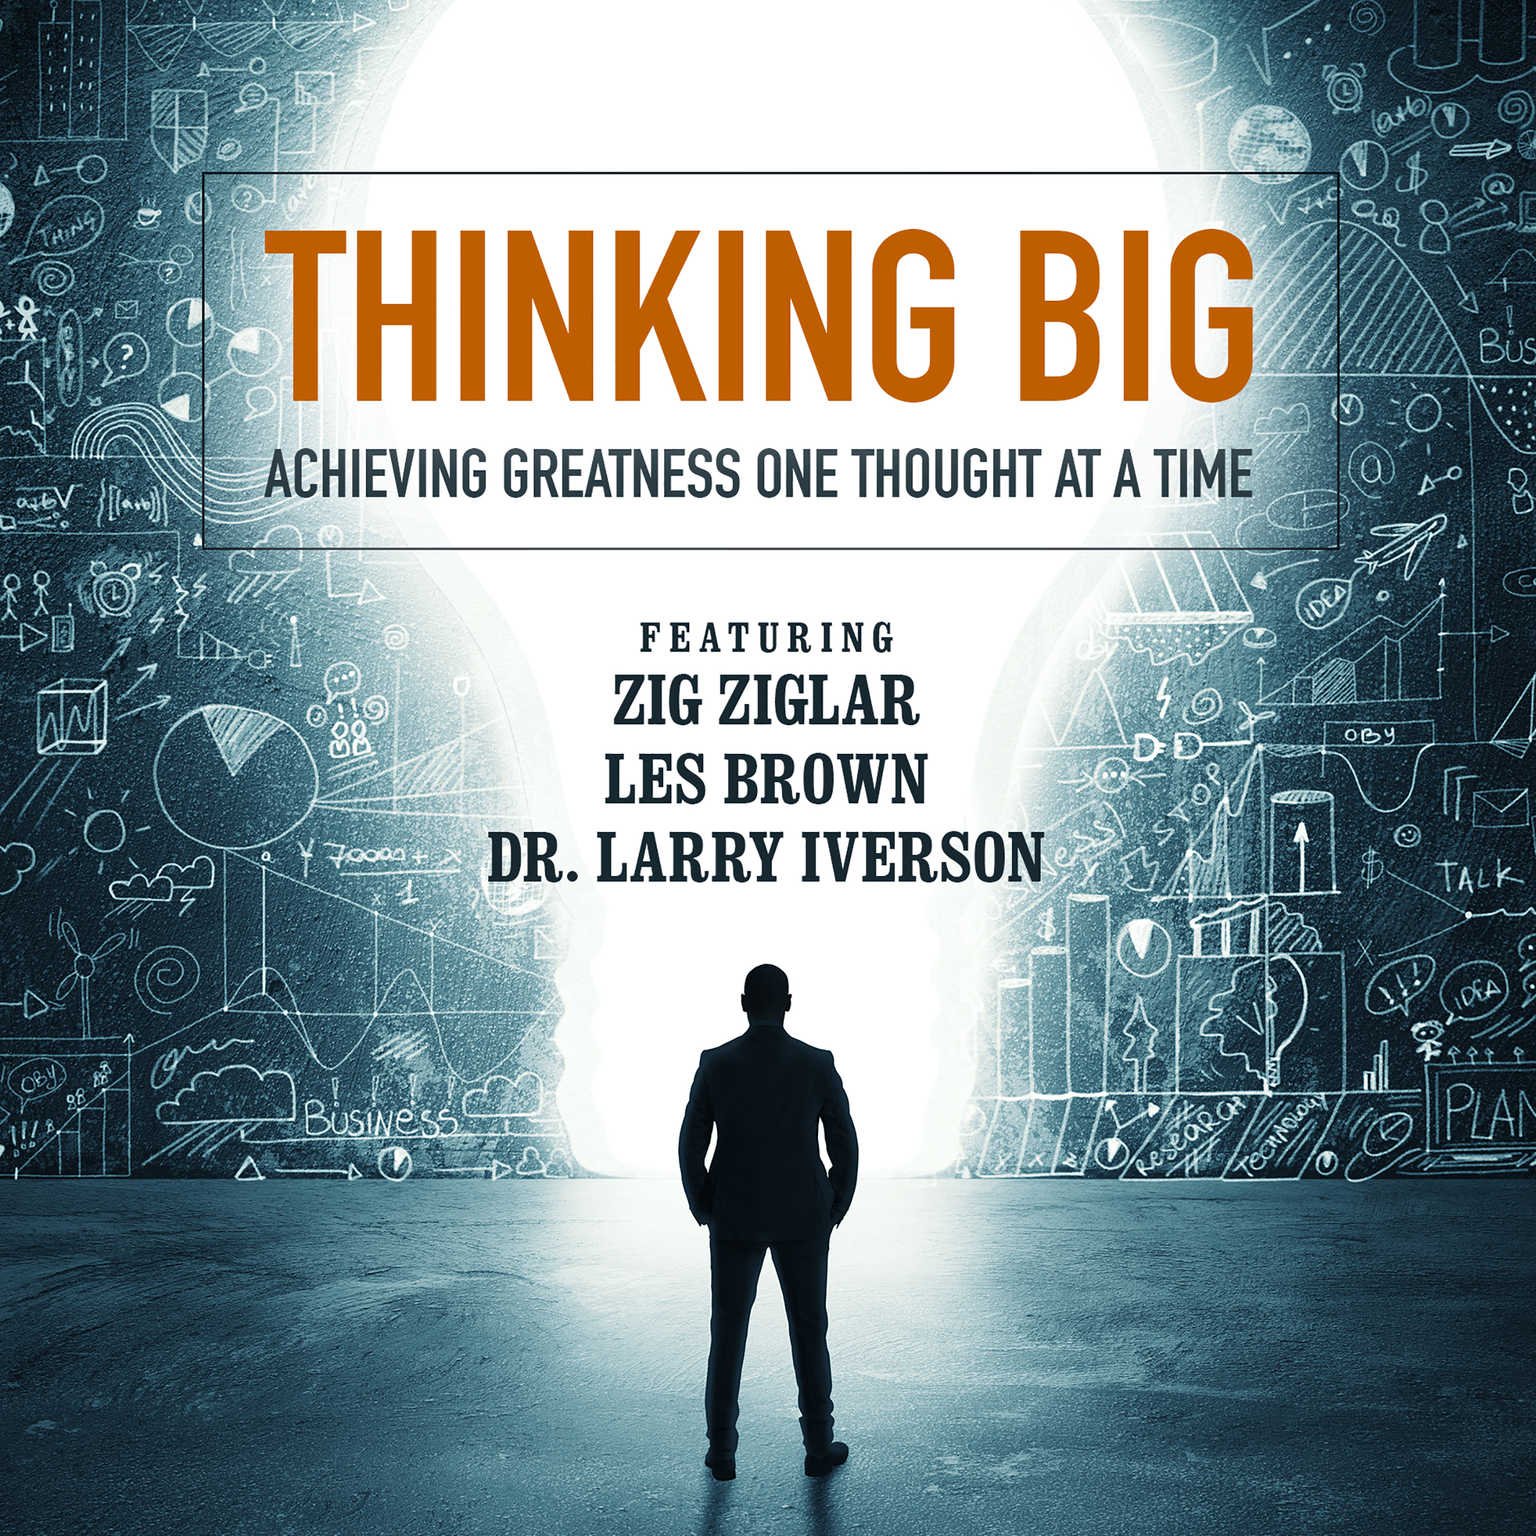 Larry Iverson, Sheila Murray Bethel, Bob Proctor & 7 More - Audible Sample Audible Sample Thinking Big: Achieving Greatness One Thought at a Time